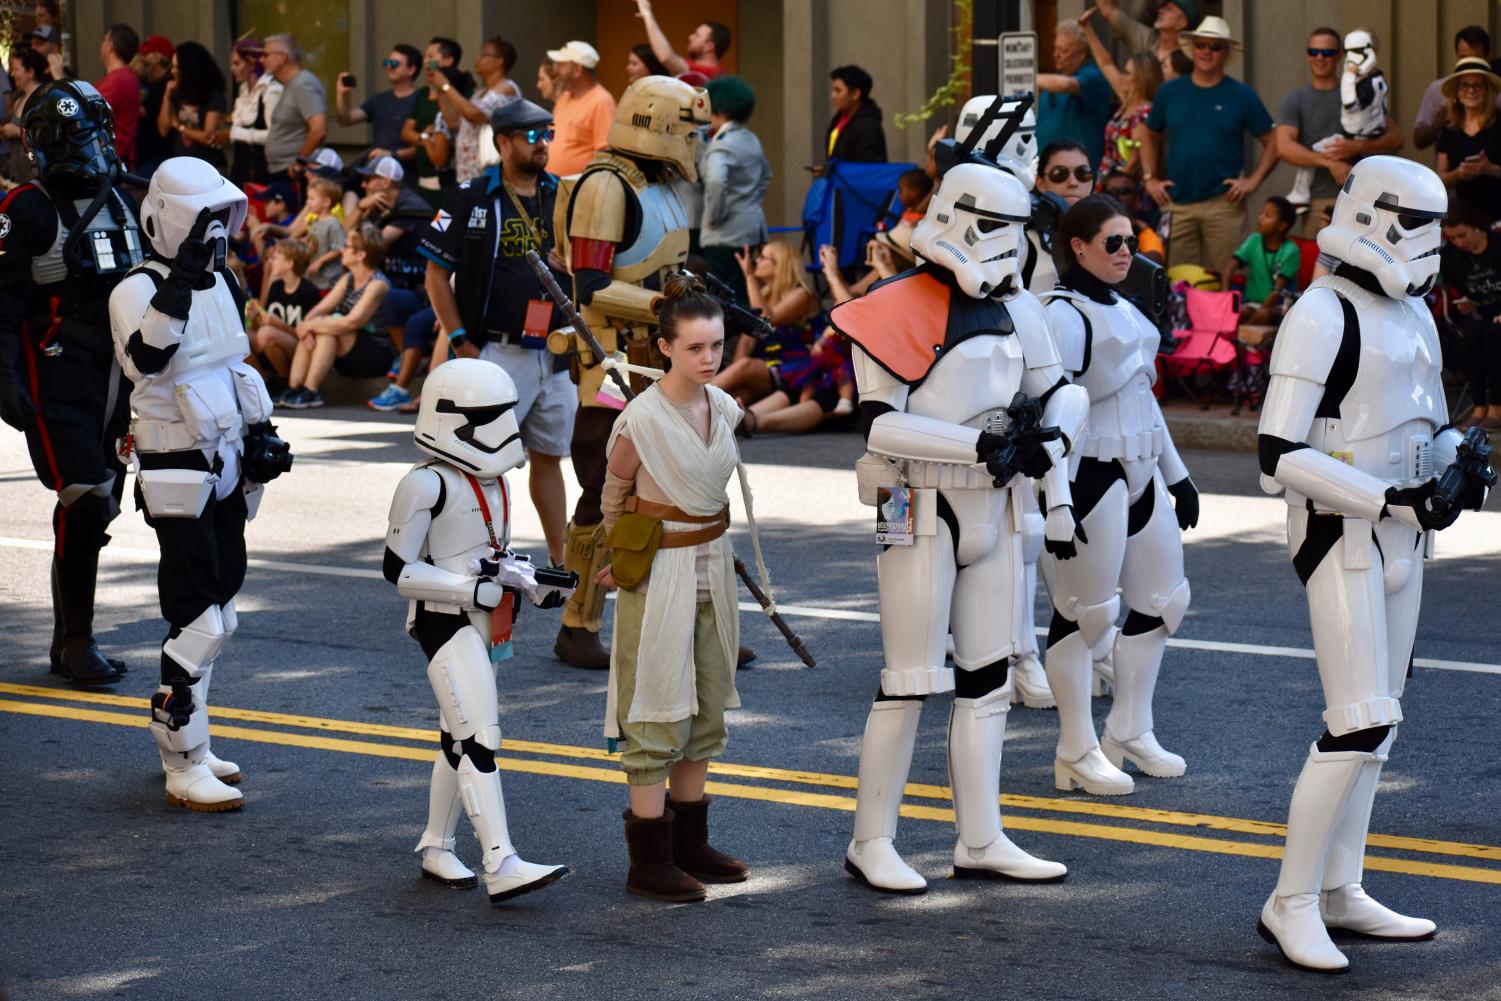 Dragon Con parade brings lively crowd to Downtown Atlanta the